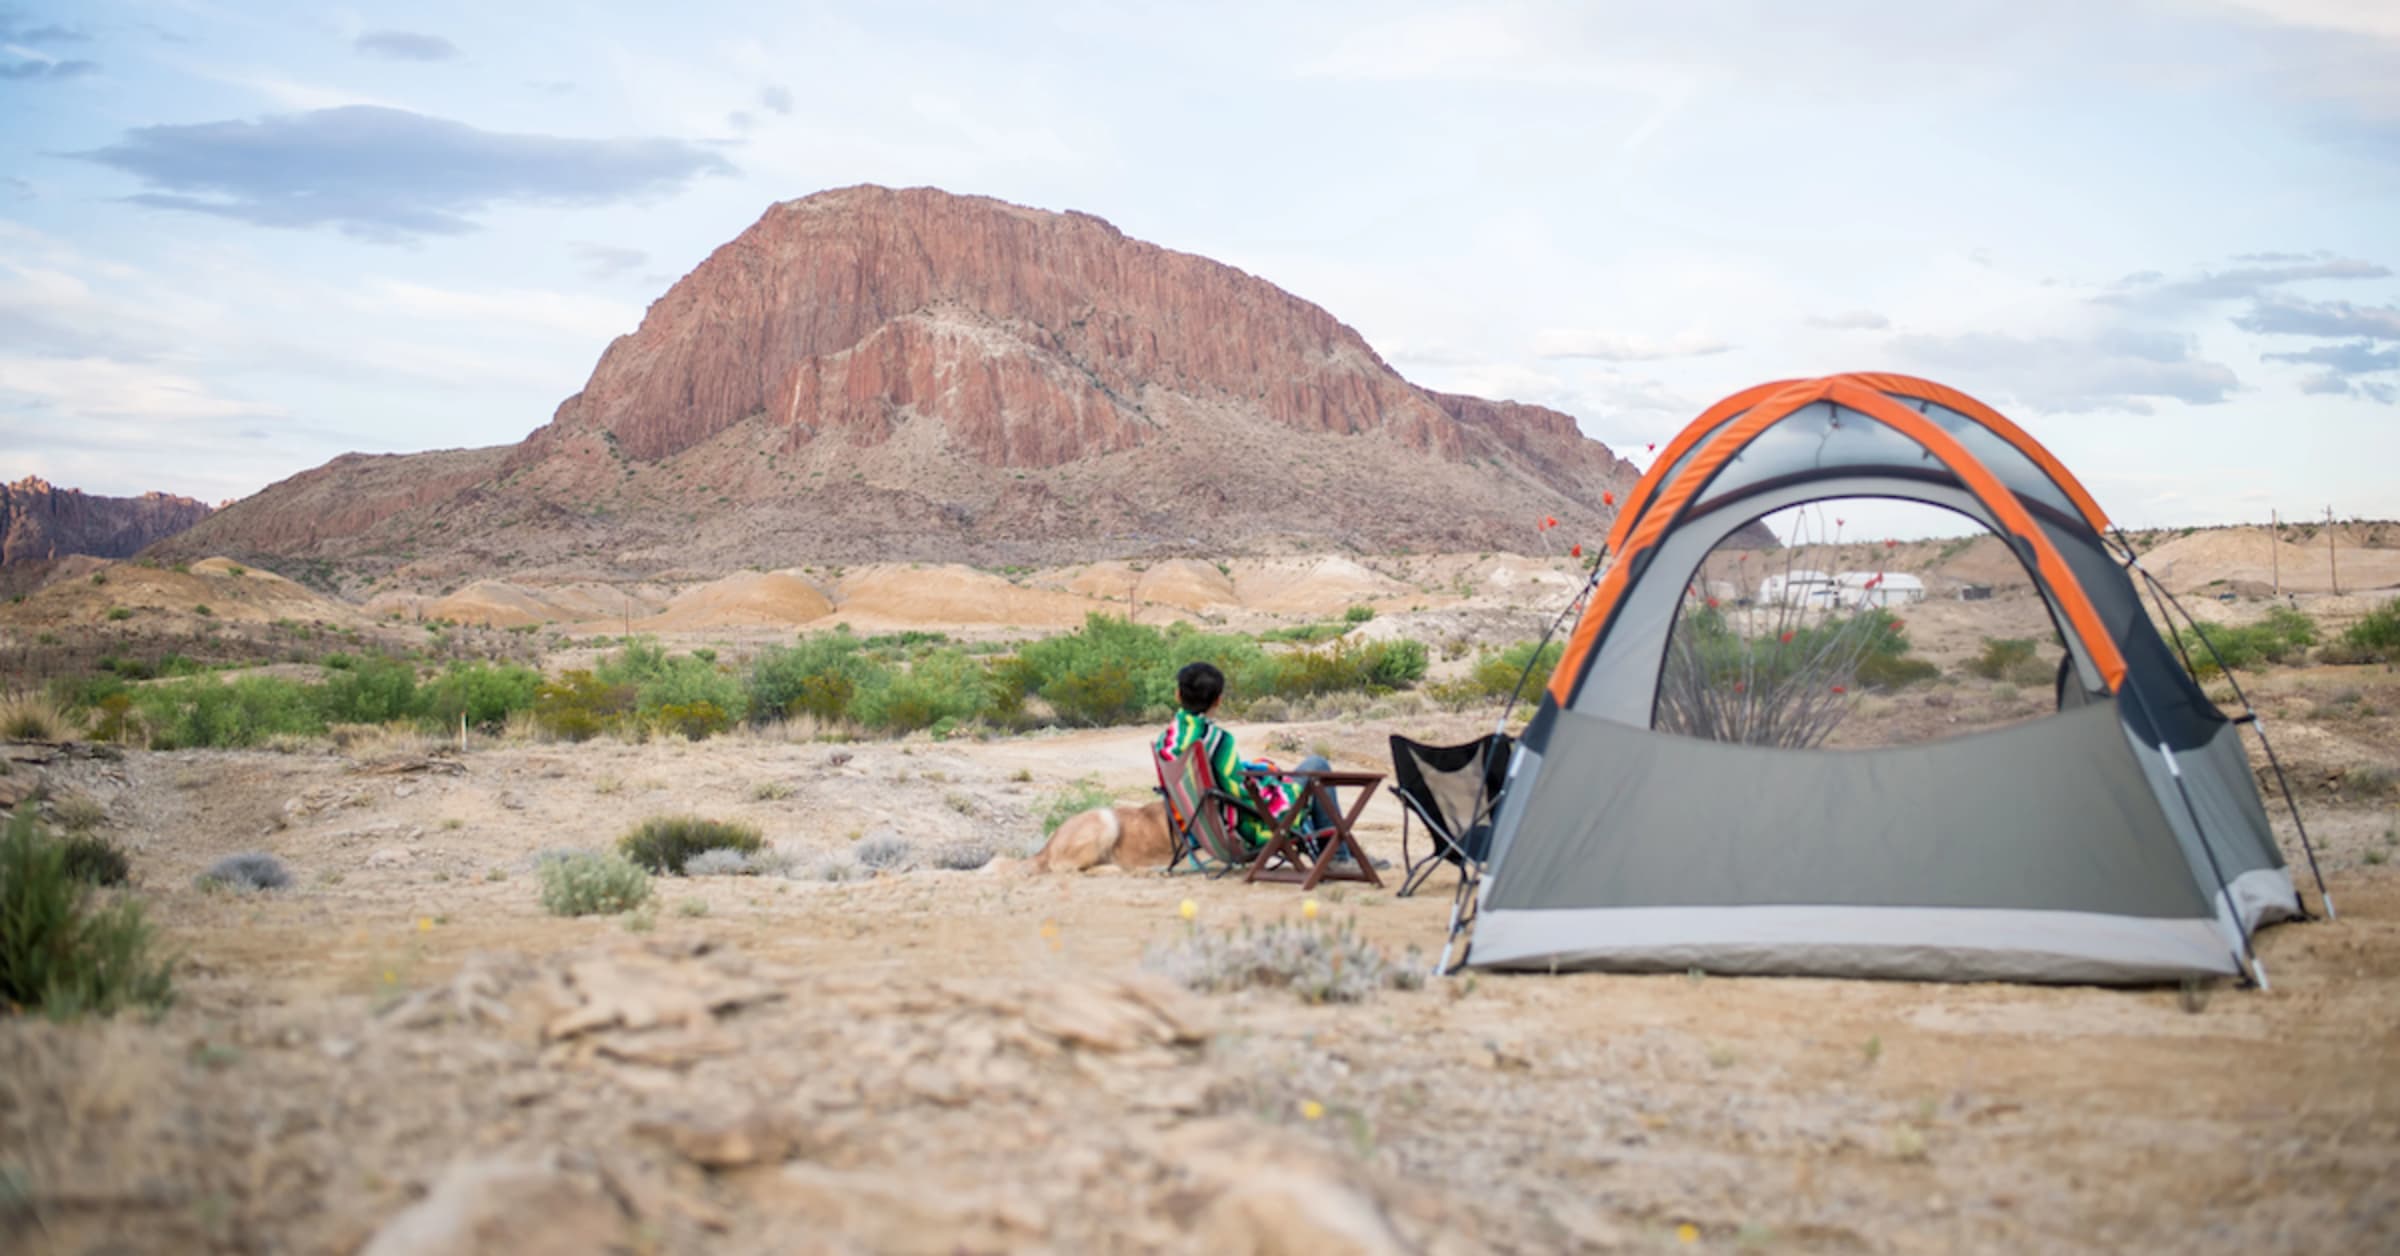 15 Unique Campsites Near Popular National Parks in the Western US